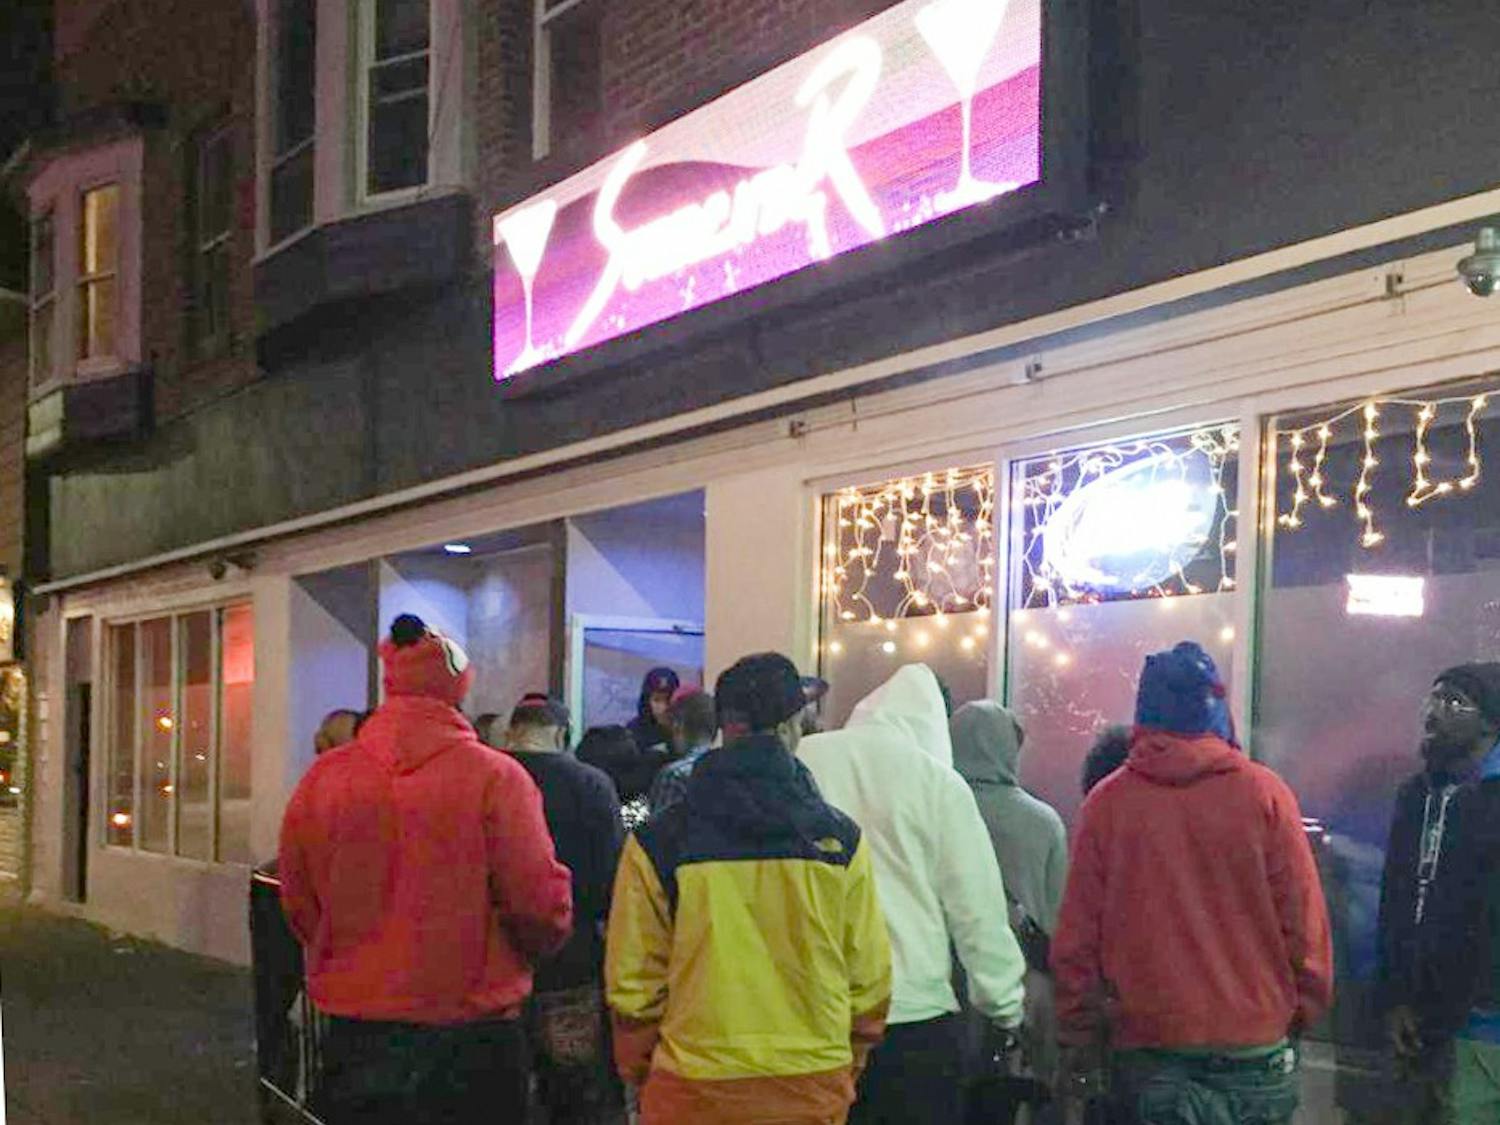 Patrons wait in line at&nbsp;Surrender, the only 18-and-up bar on Main Street in the&nbsp;University&nbsp;Heights. Surrender&nbsp;has become popular with students this semester after the police crackdown on house parties.&nbsp;